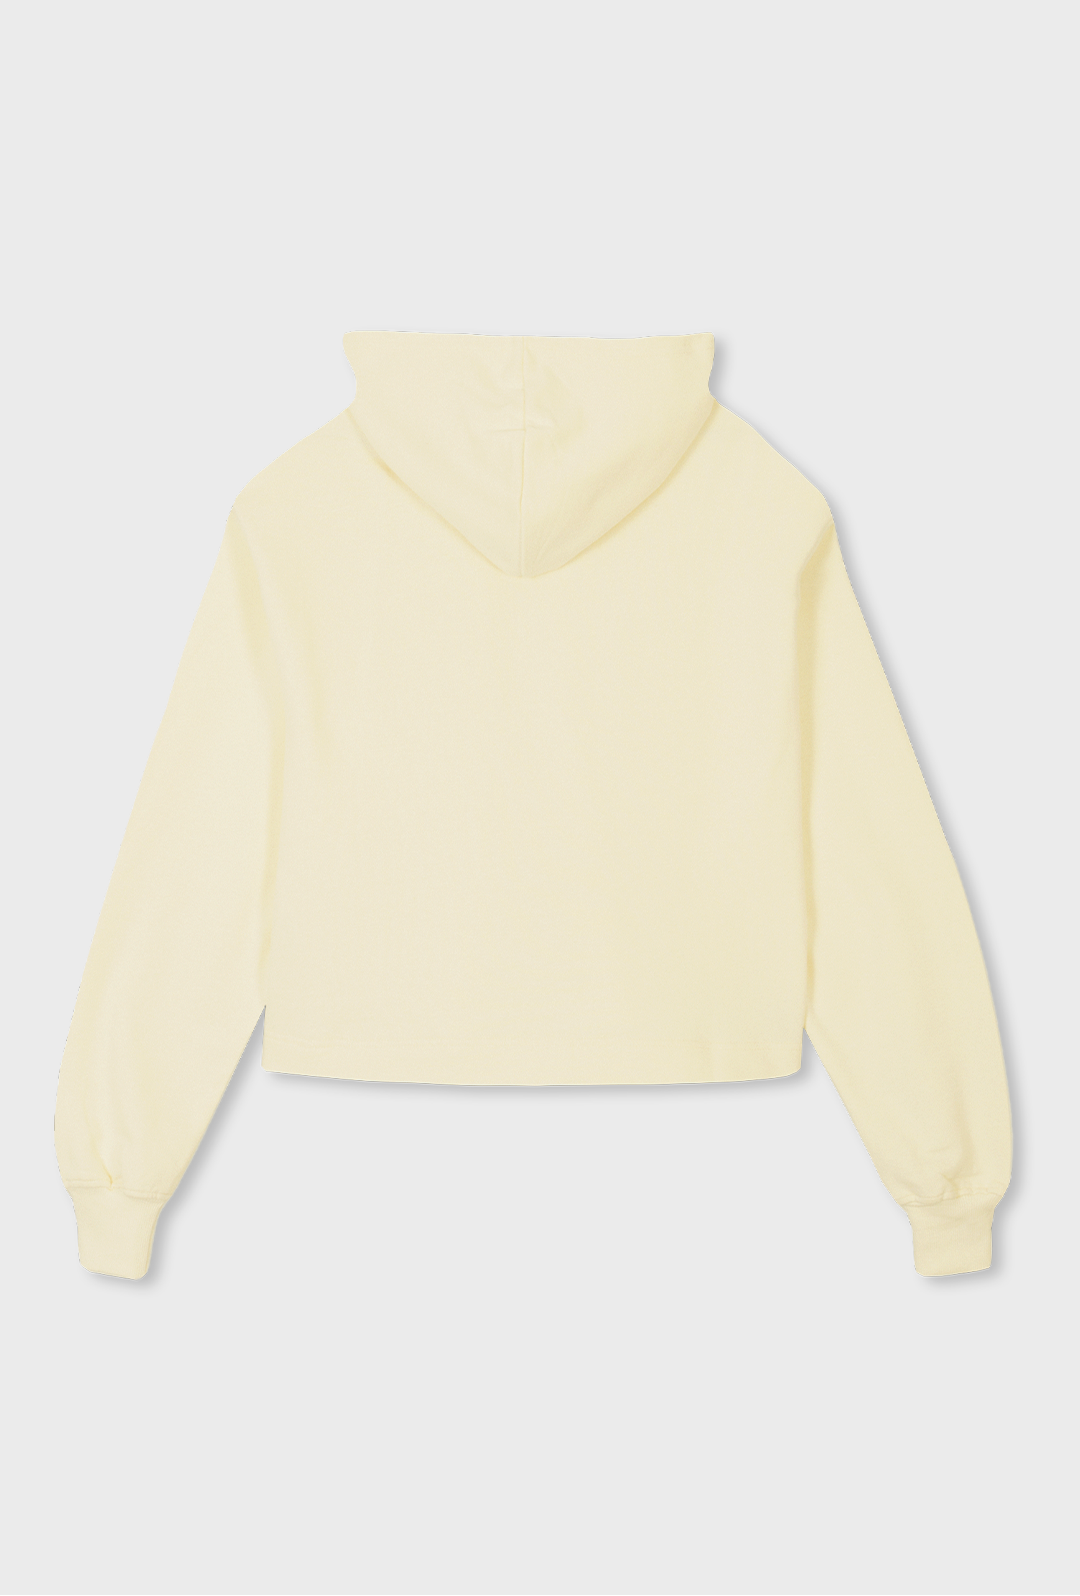 drop shoulder rollr clothing heavyweight vanilla cream box fit hoodie made from french terry fabric 100% organic cotton